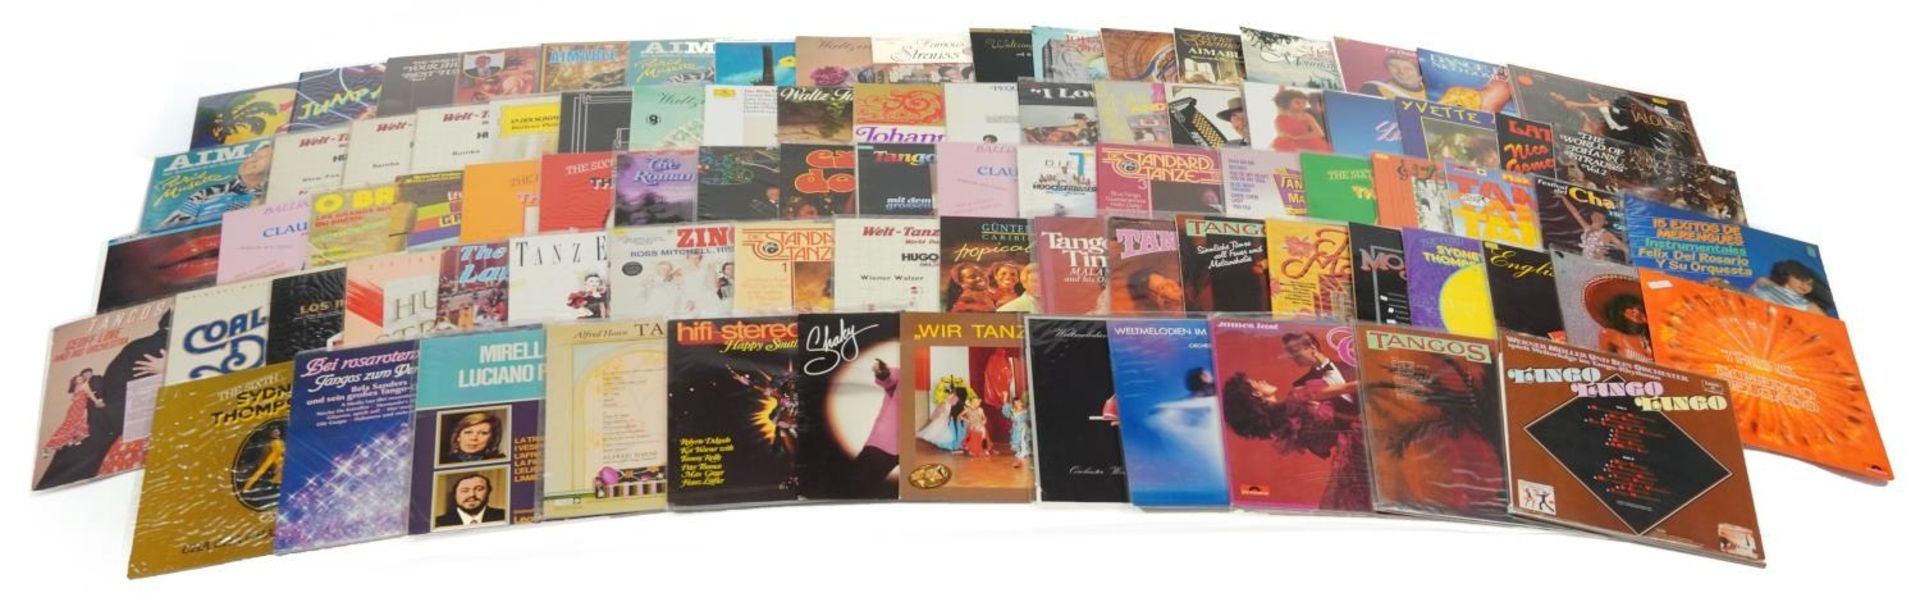 Predominantly Latin and classical vinyl LP records including Sydney Thompson, The Latin Magic of